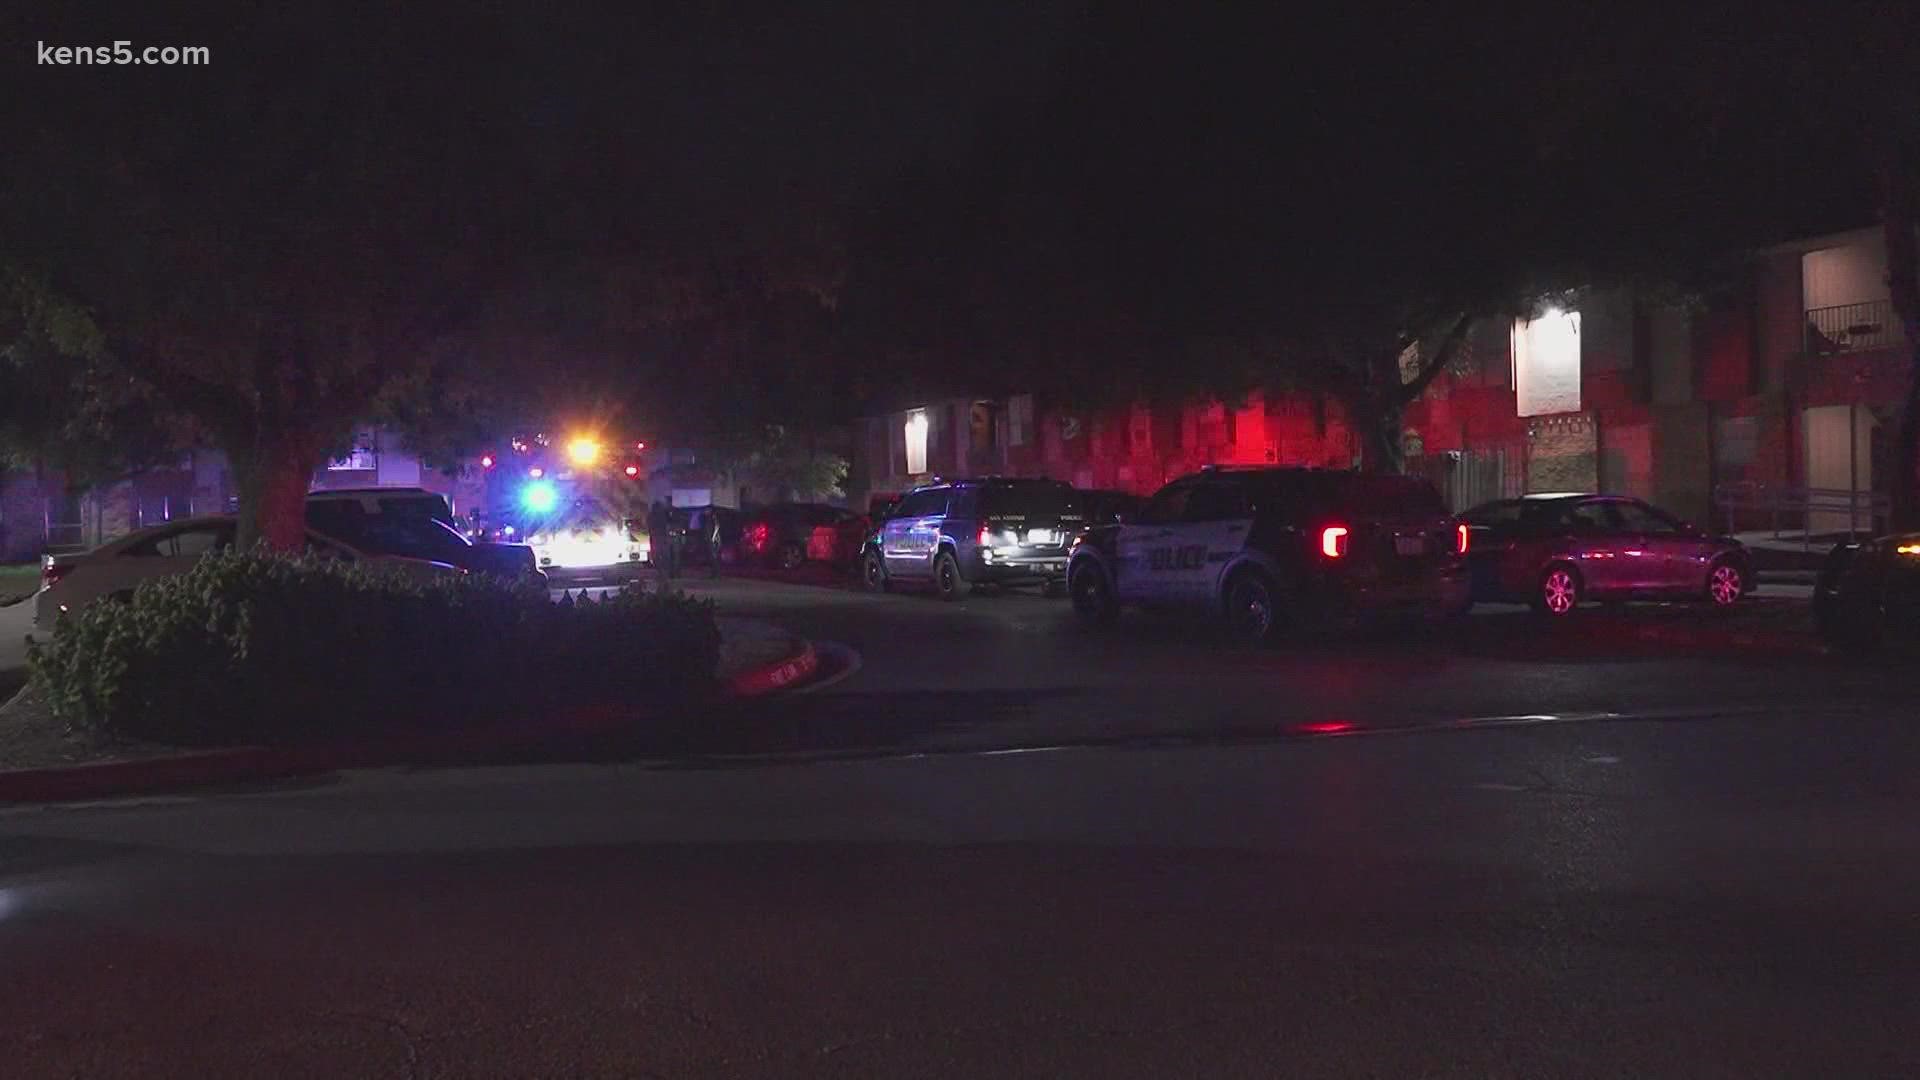 The San Antonio Police Department believes the suspect also lives at that apartment complex.